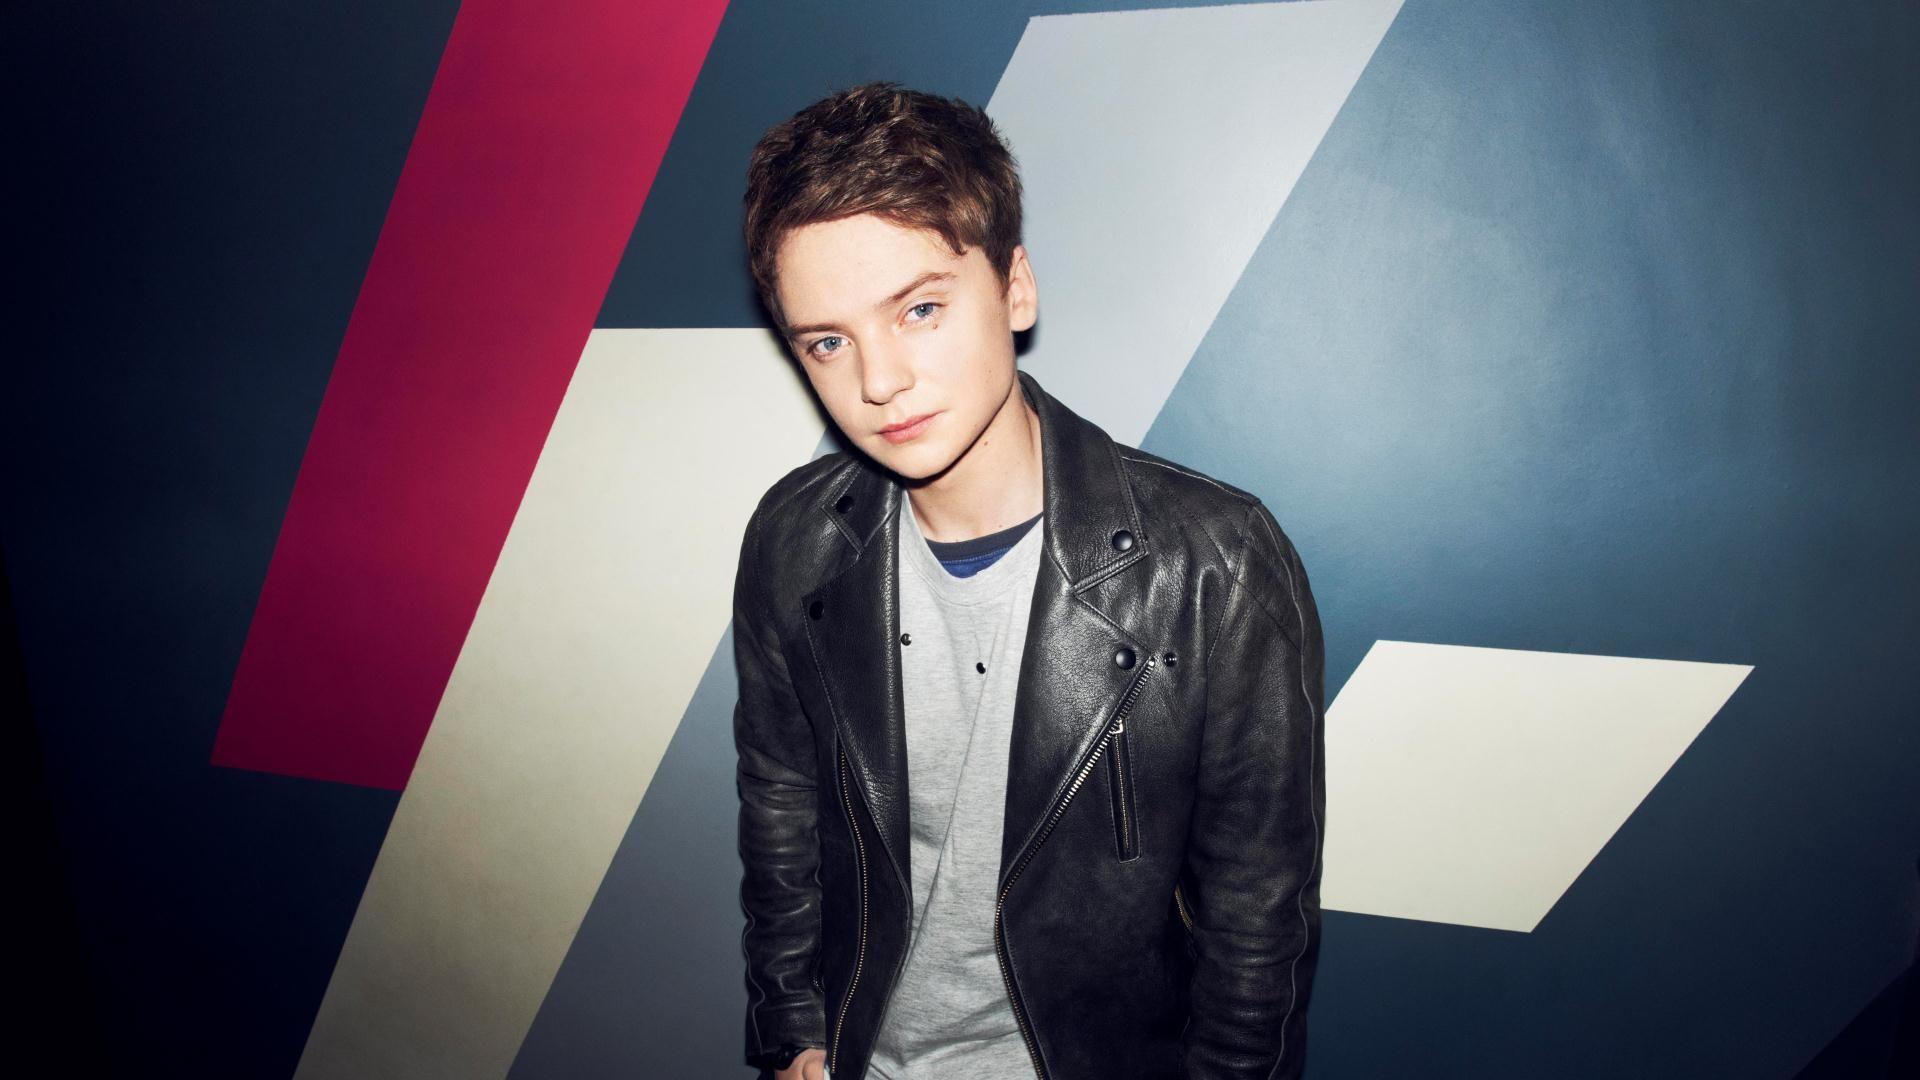 Conor Maynard HD Wallpaper and Background Image